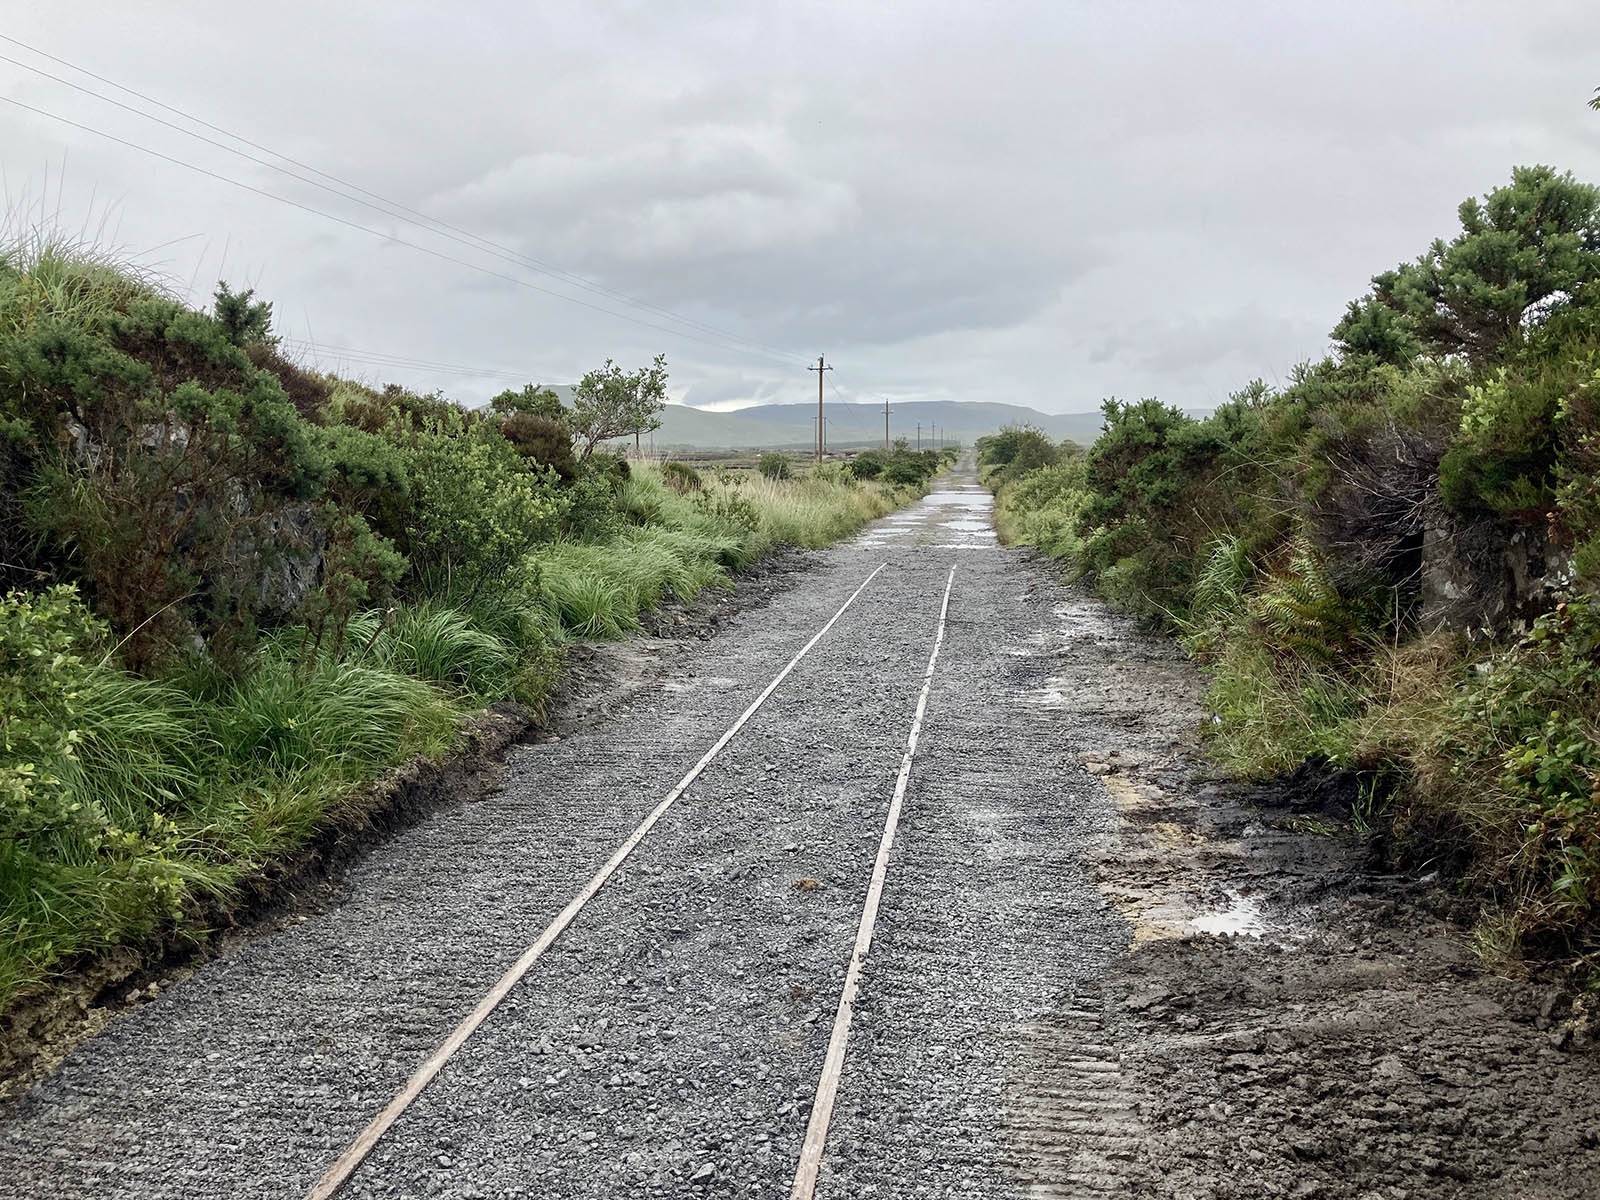 The finished temporary track looking towards Galway. 